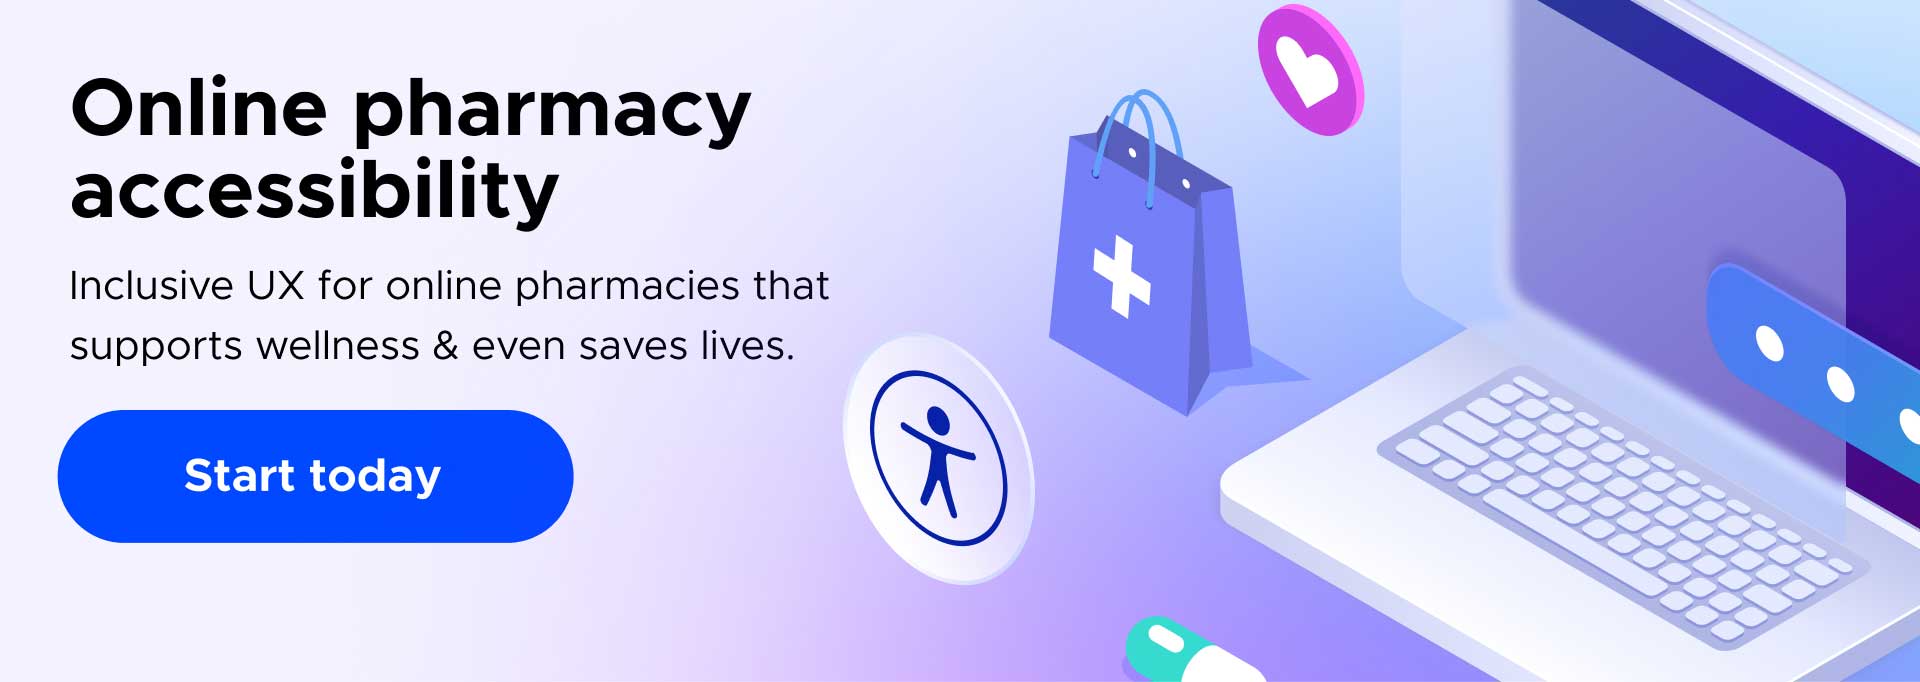 online pharmacy accessibility